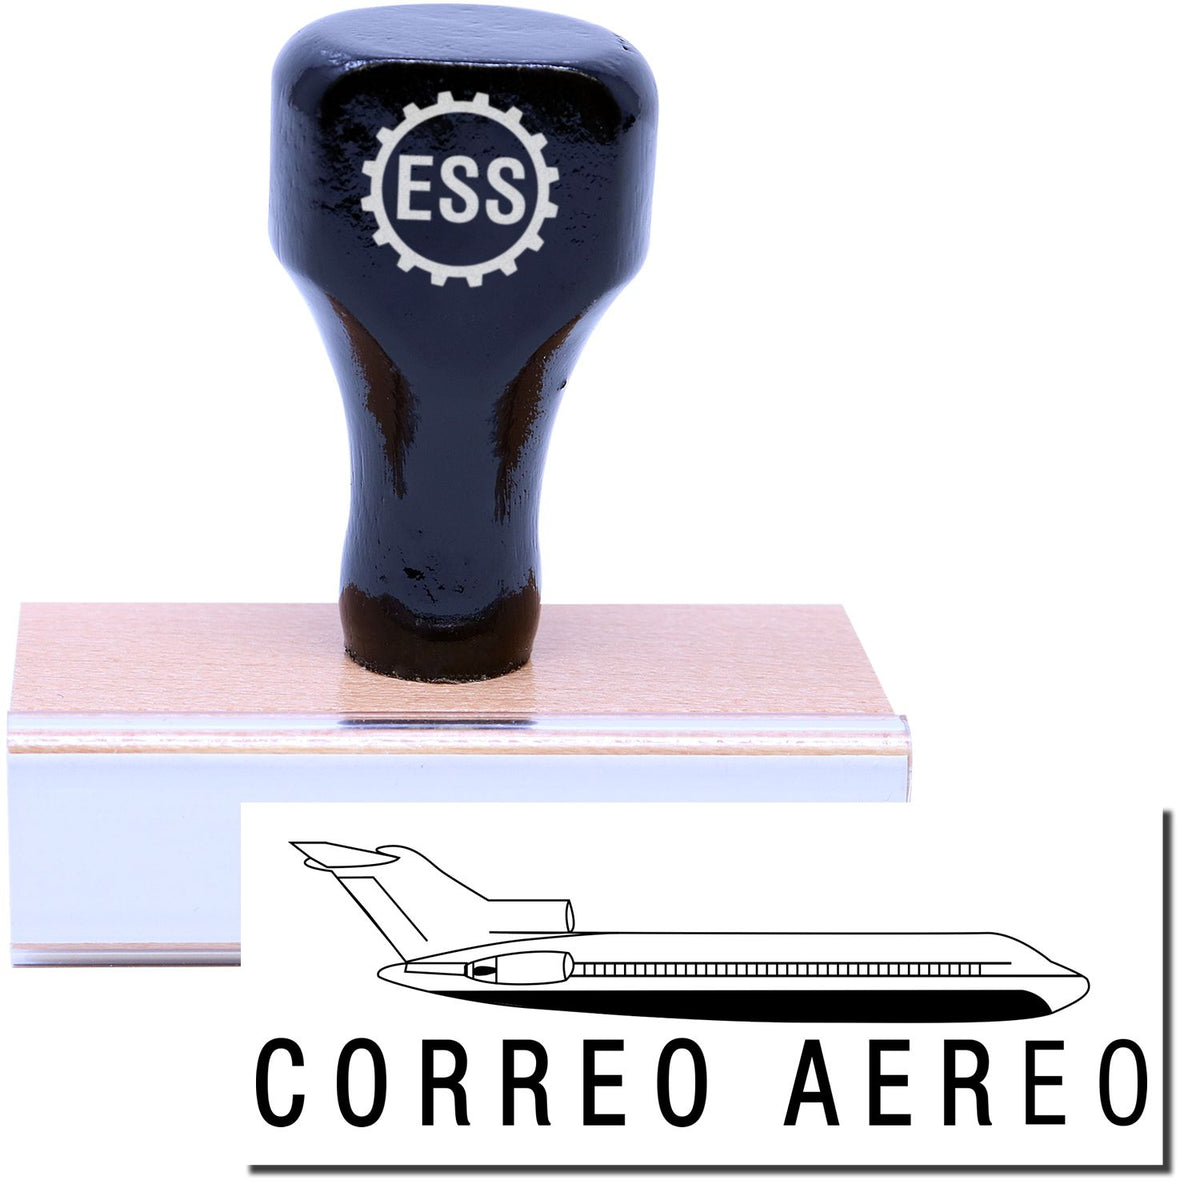 A stock office rubber stamp with a stamped image showing how the text &quot;CORREO AERO&quot; with an icon of a plane above the text is displayed after stamping.